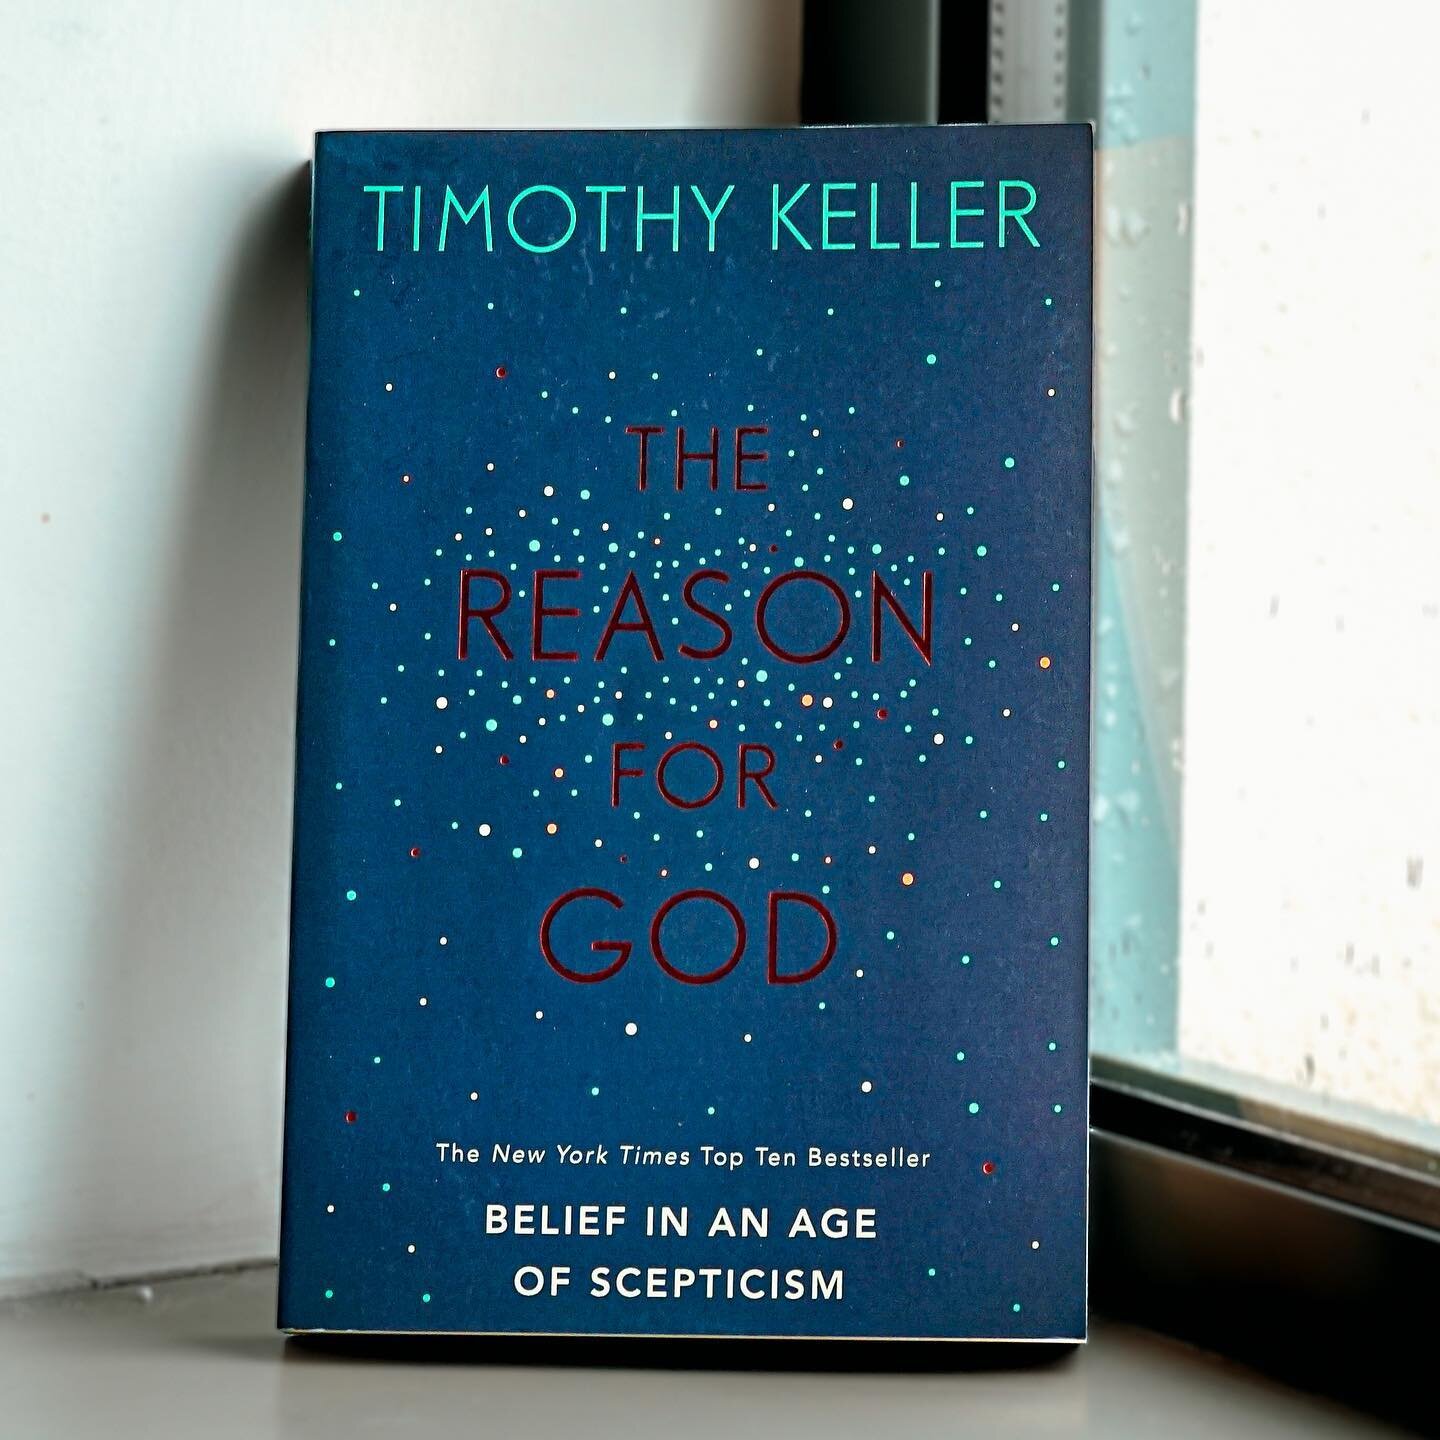 REMNANT RESOURCES📚✏️

The third and final book that we&rsquo;re recommending ahead of our first gathering is &lsquo;The Reason for God&rsquo; written by @timkellernyc Here in NI/Ireland we are known for our warmth, our friendliness and our (often sa